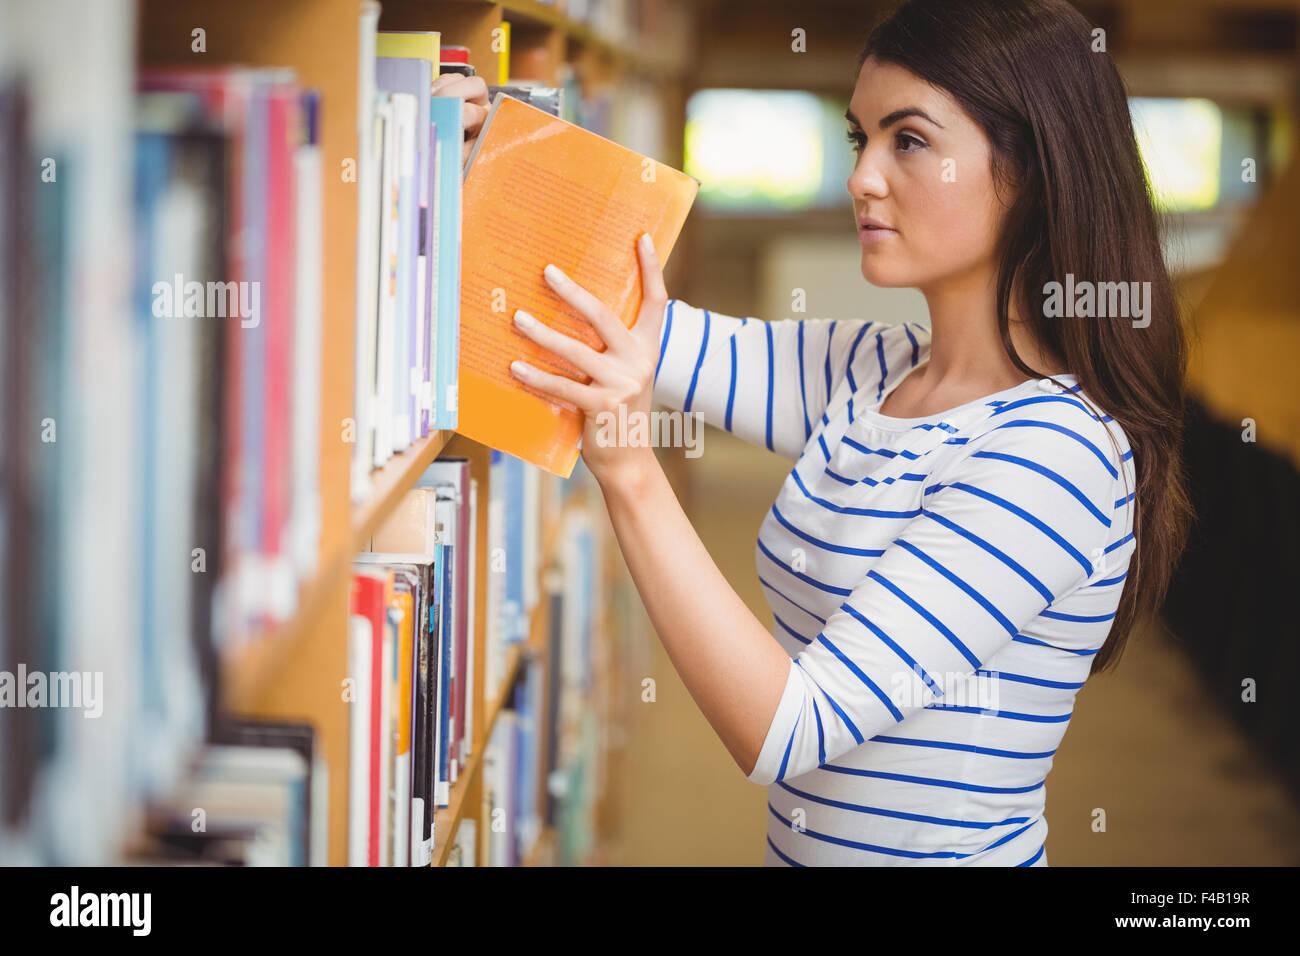 Female student choosing book Banque D'Images